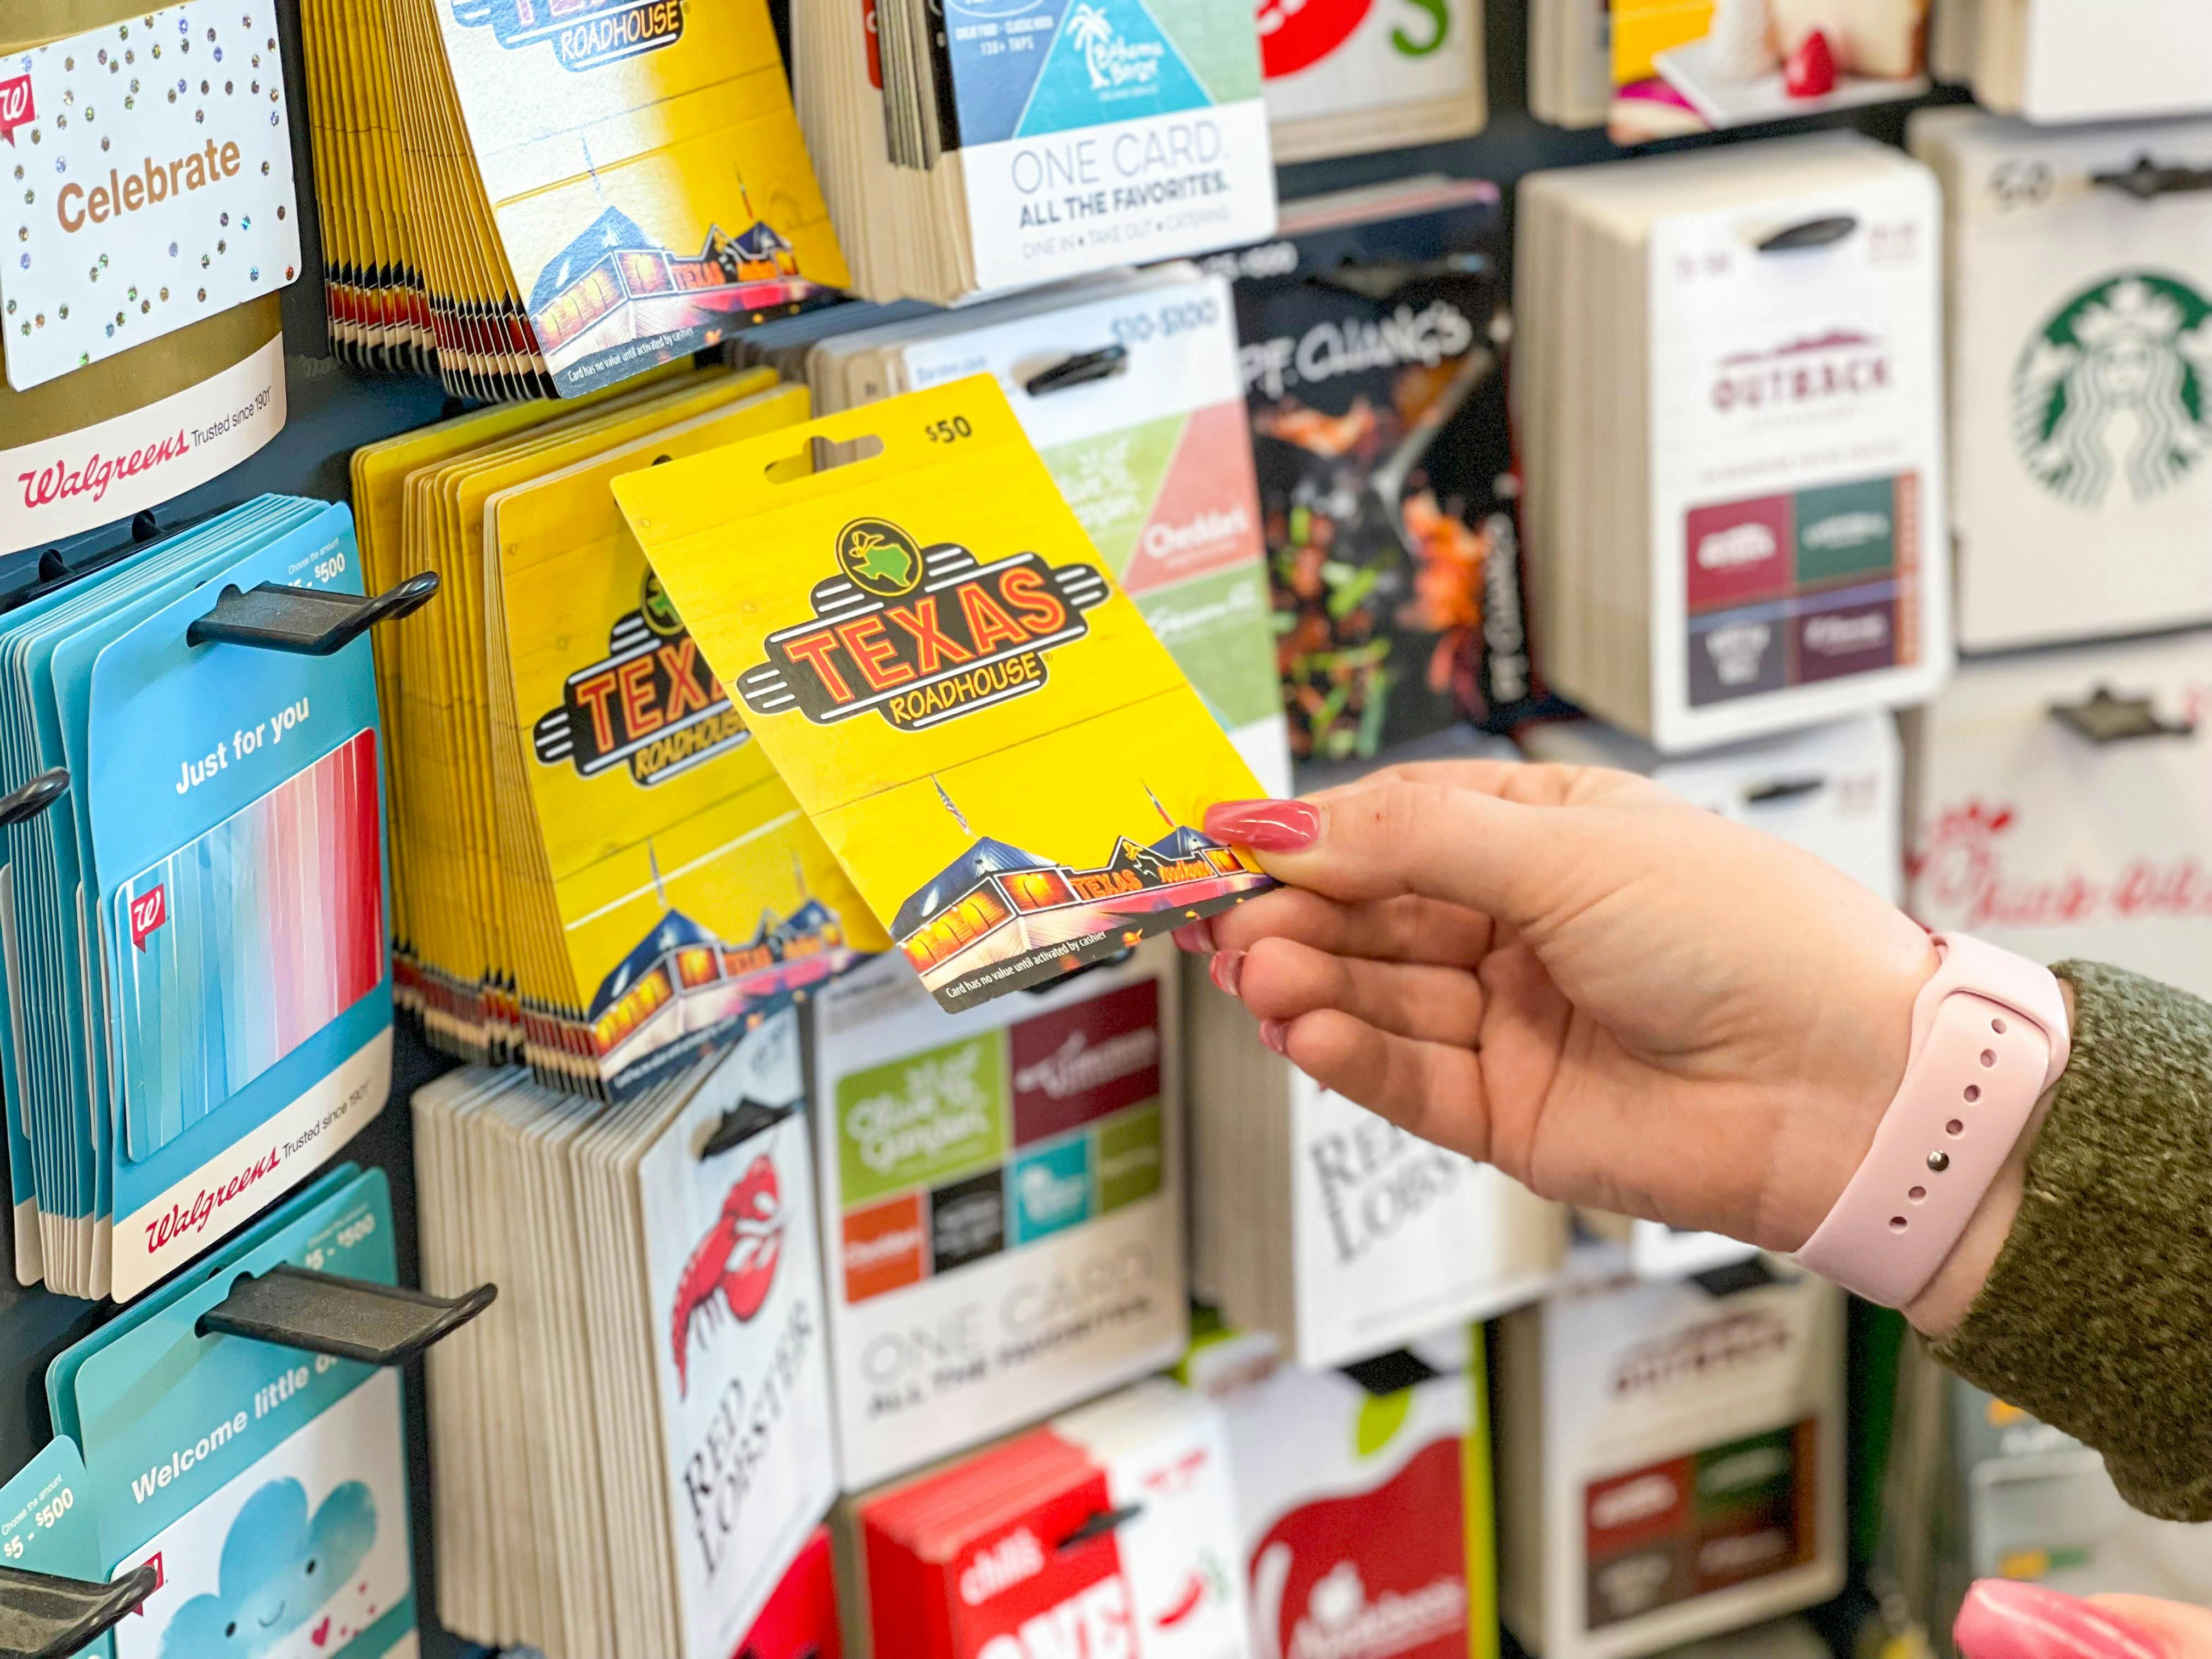 A person reaching to take a gift card from a display of gift cards.